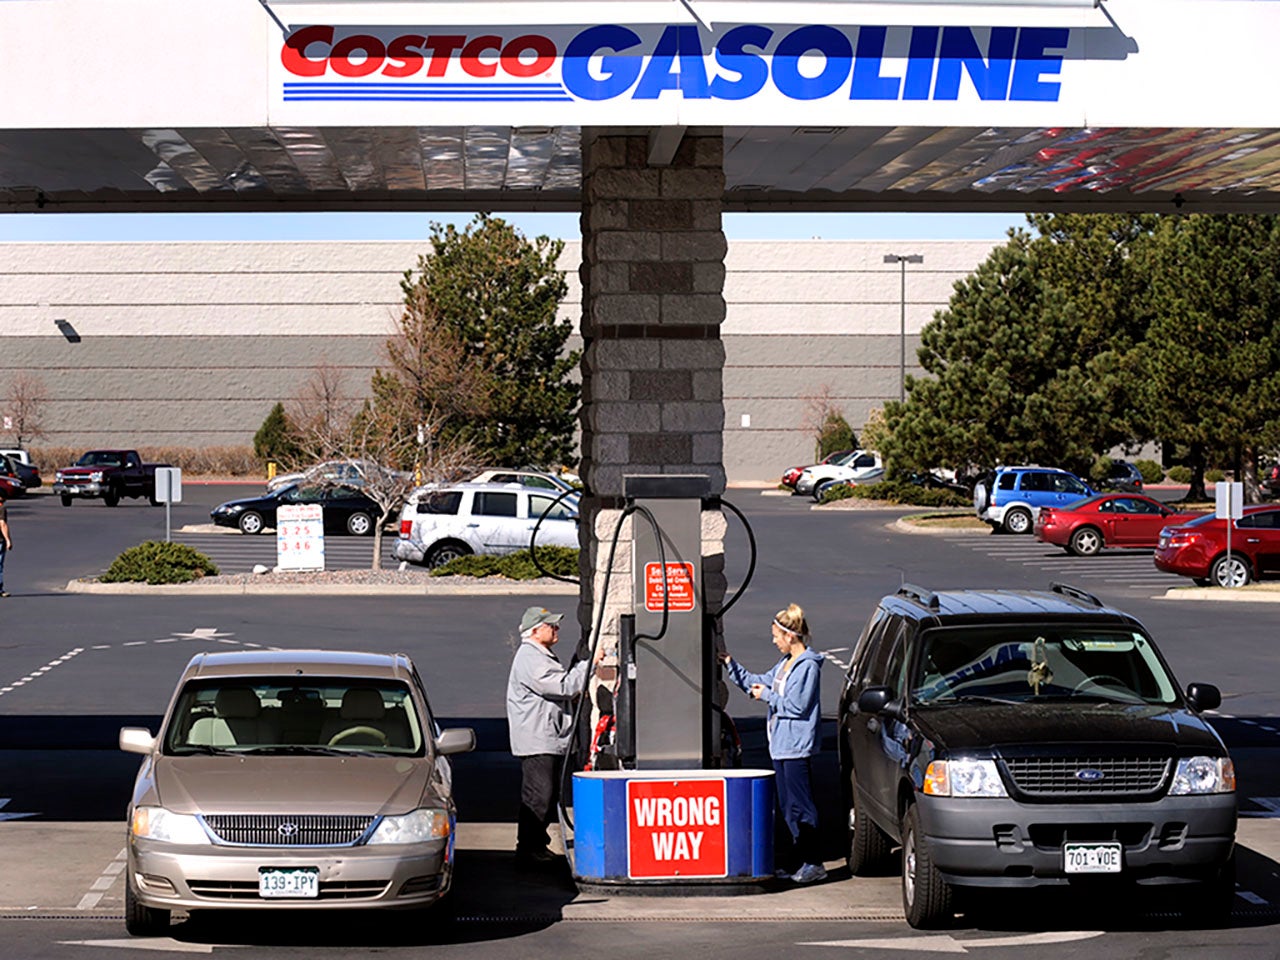 Do You Get 2 Cash Back On Costco Gas